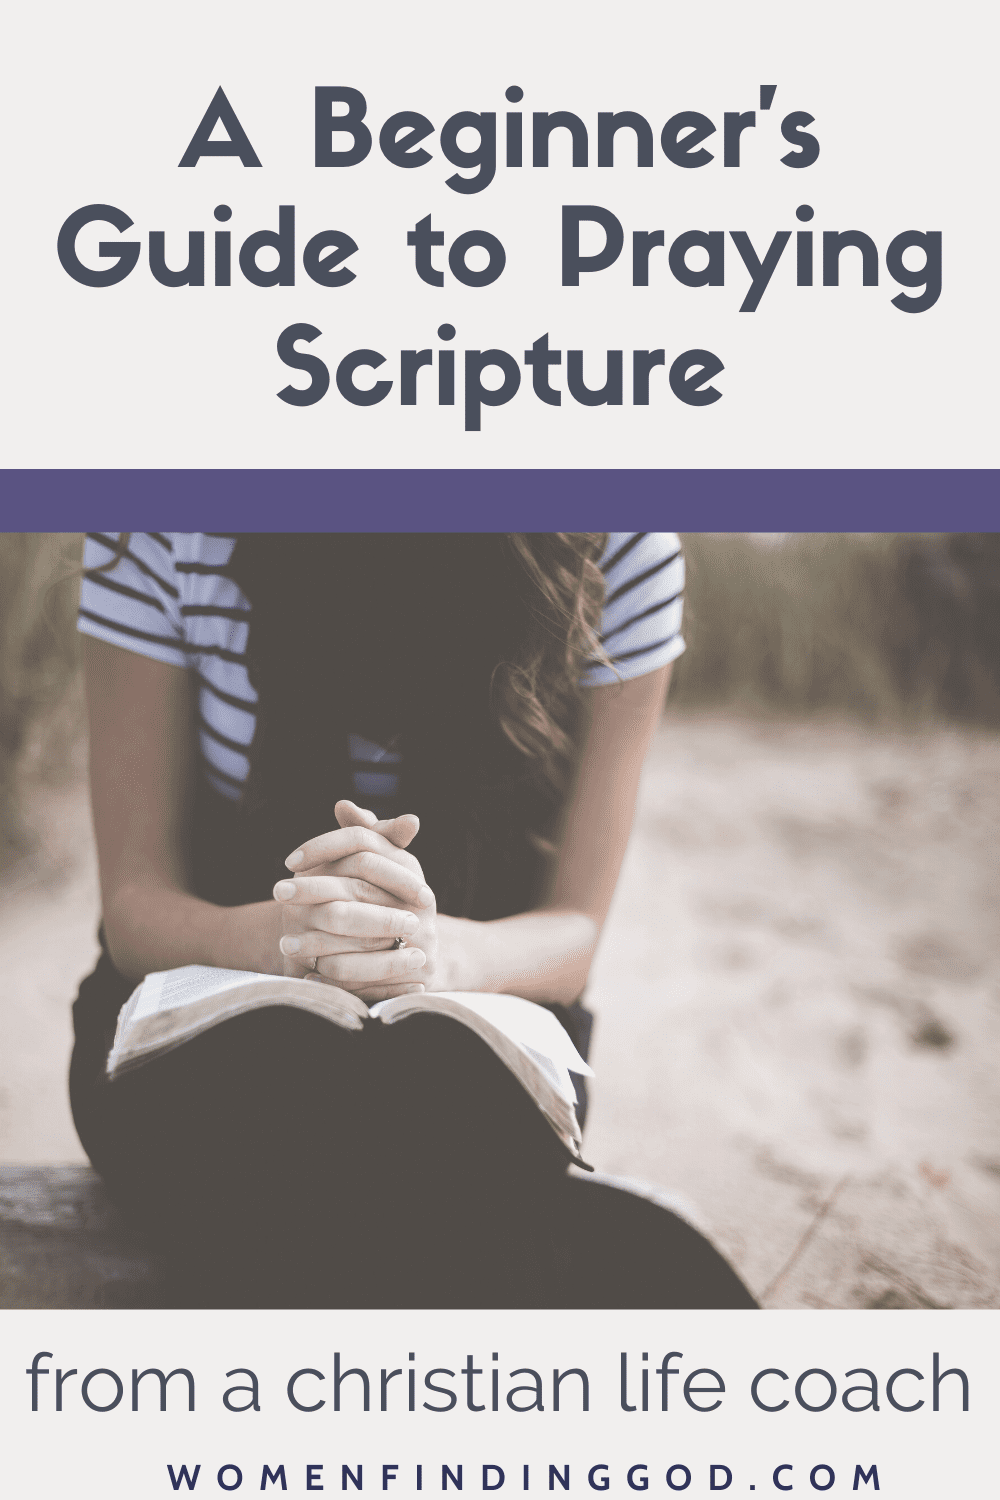 Are you ready to learn how to pray God’s word? Learn the step-by-step process on how to pray scripture and how to pray effectively - without having to feel like you don’t know what to pray. Plus, tips about how to include these prayers in your daily prayer routine with prayer examples to help you get started.